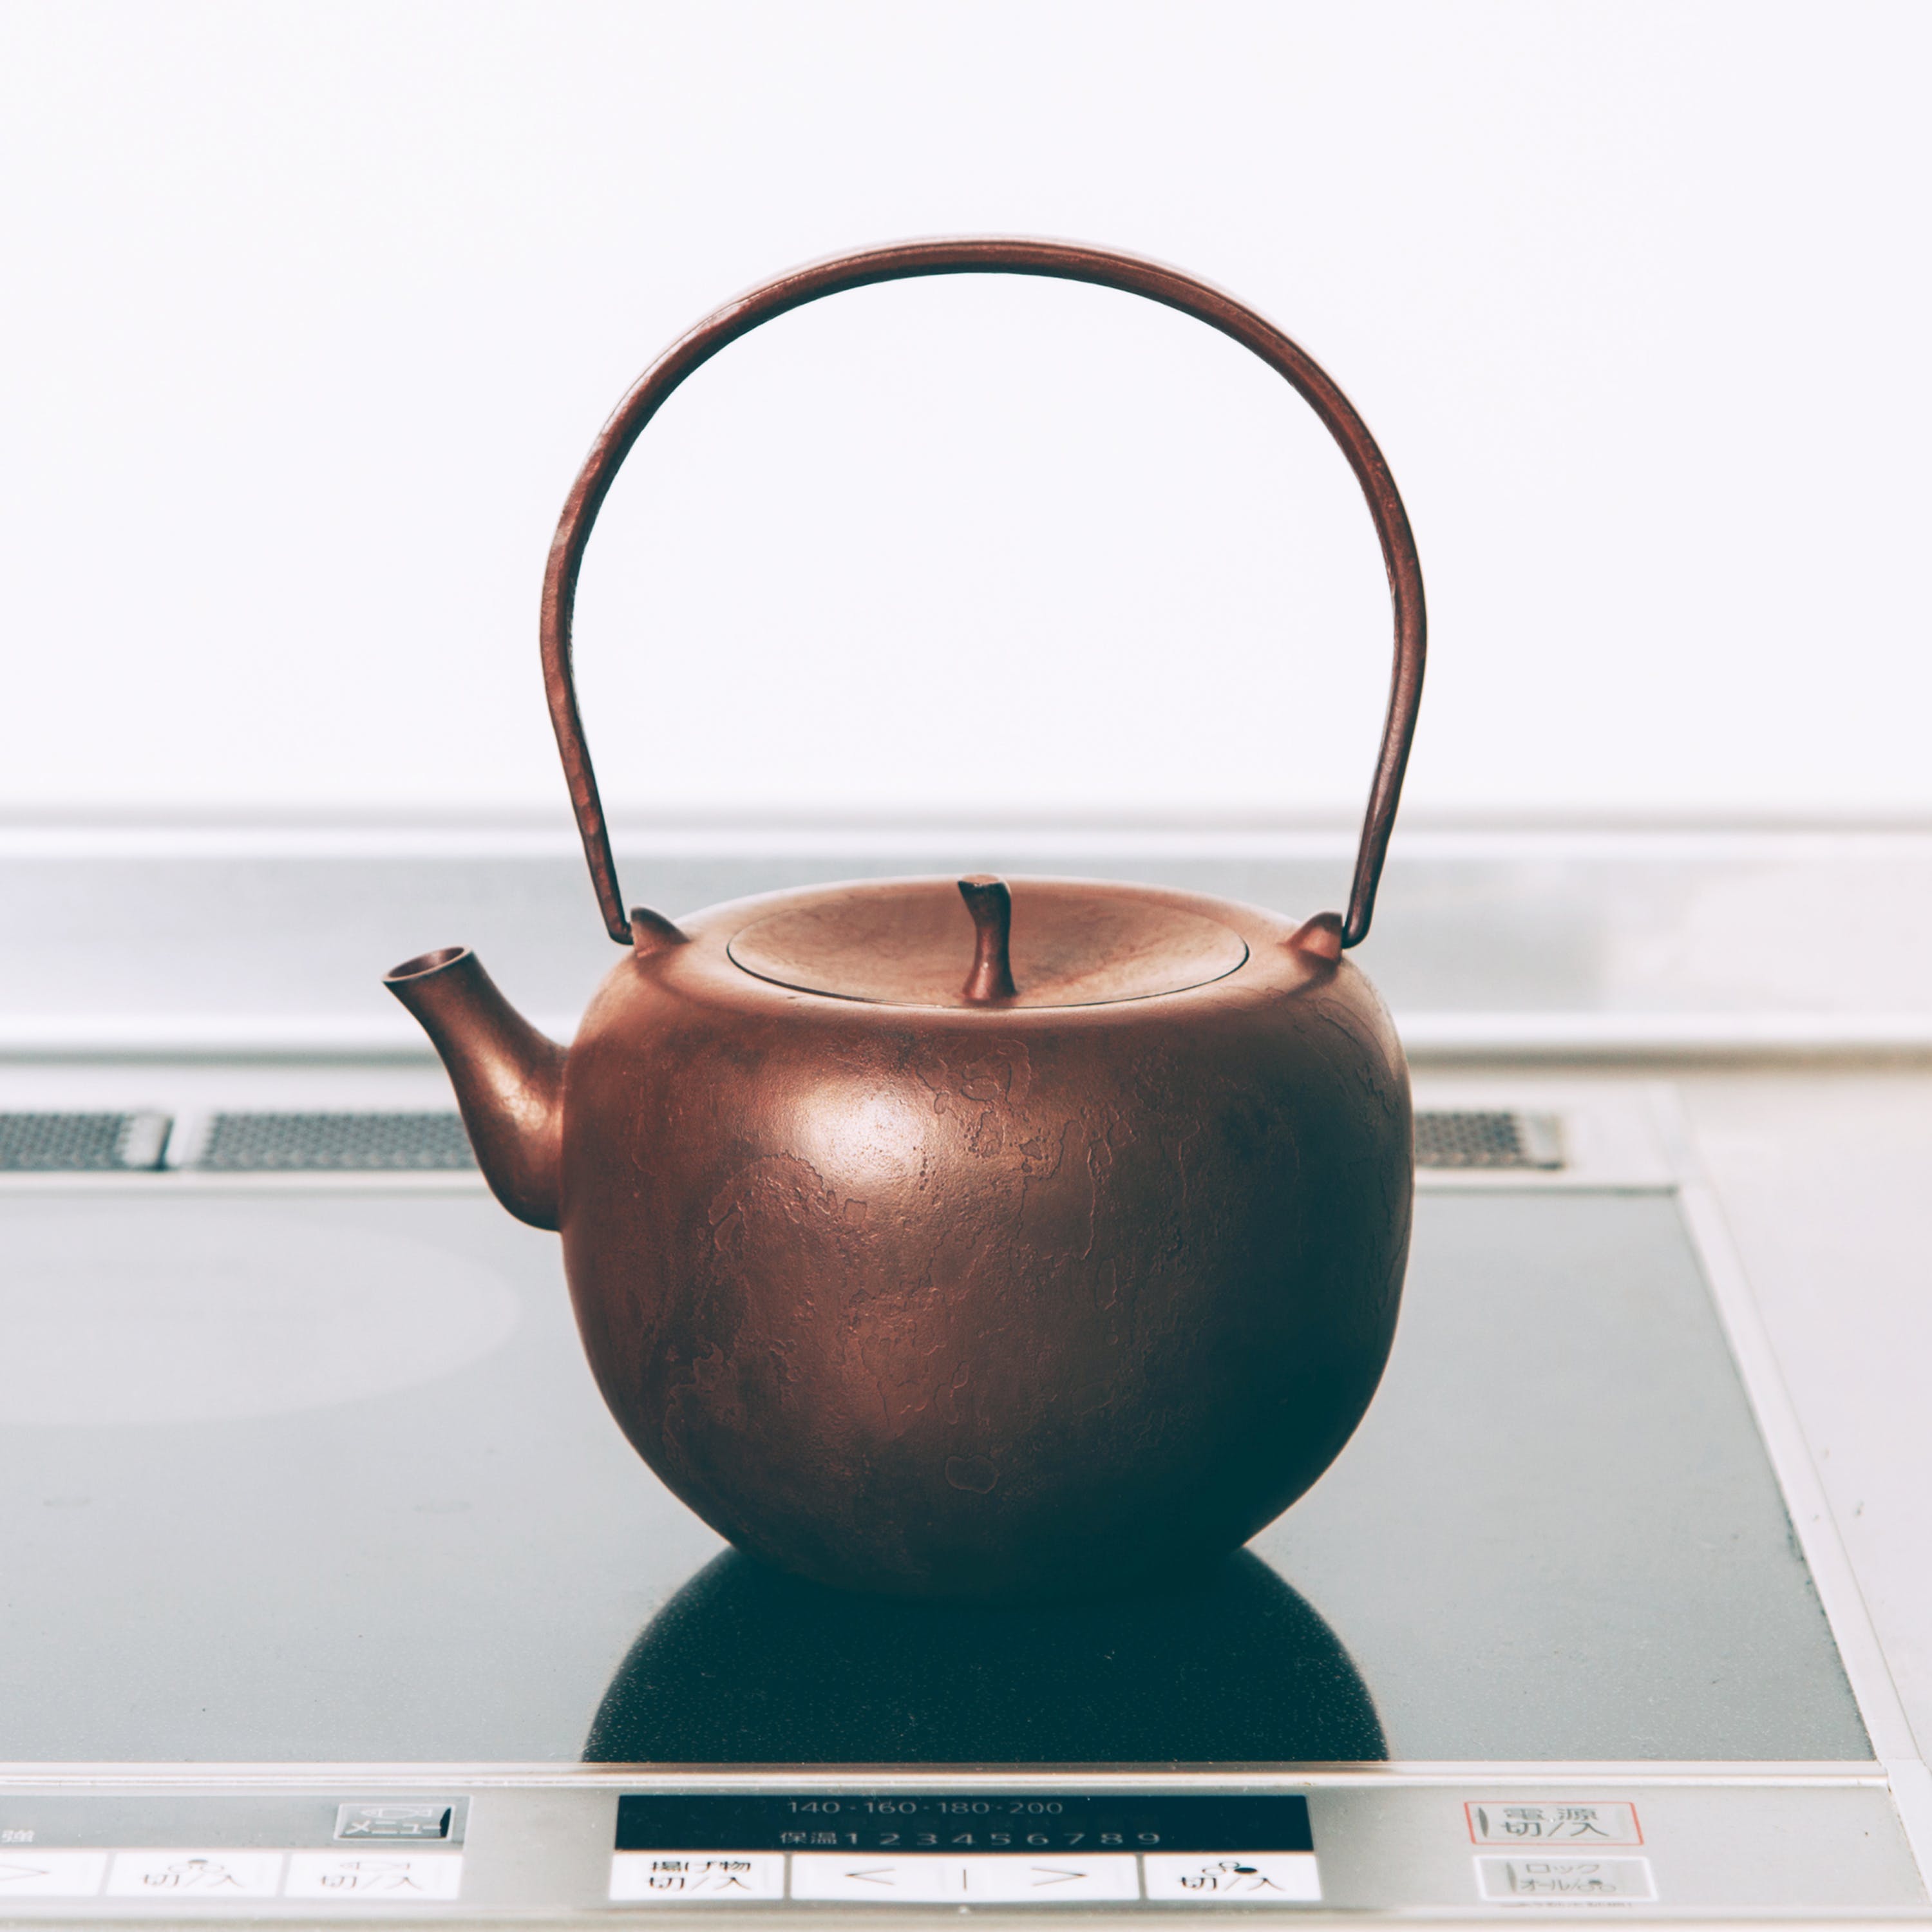 A reddish-brown cast iron kettle sits on a black induction stove. The kettle is round with a flattish top and a lid a bit like the top of an apple. The kettle has a long handle for holding on top.